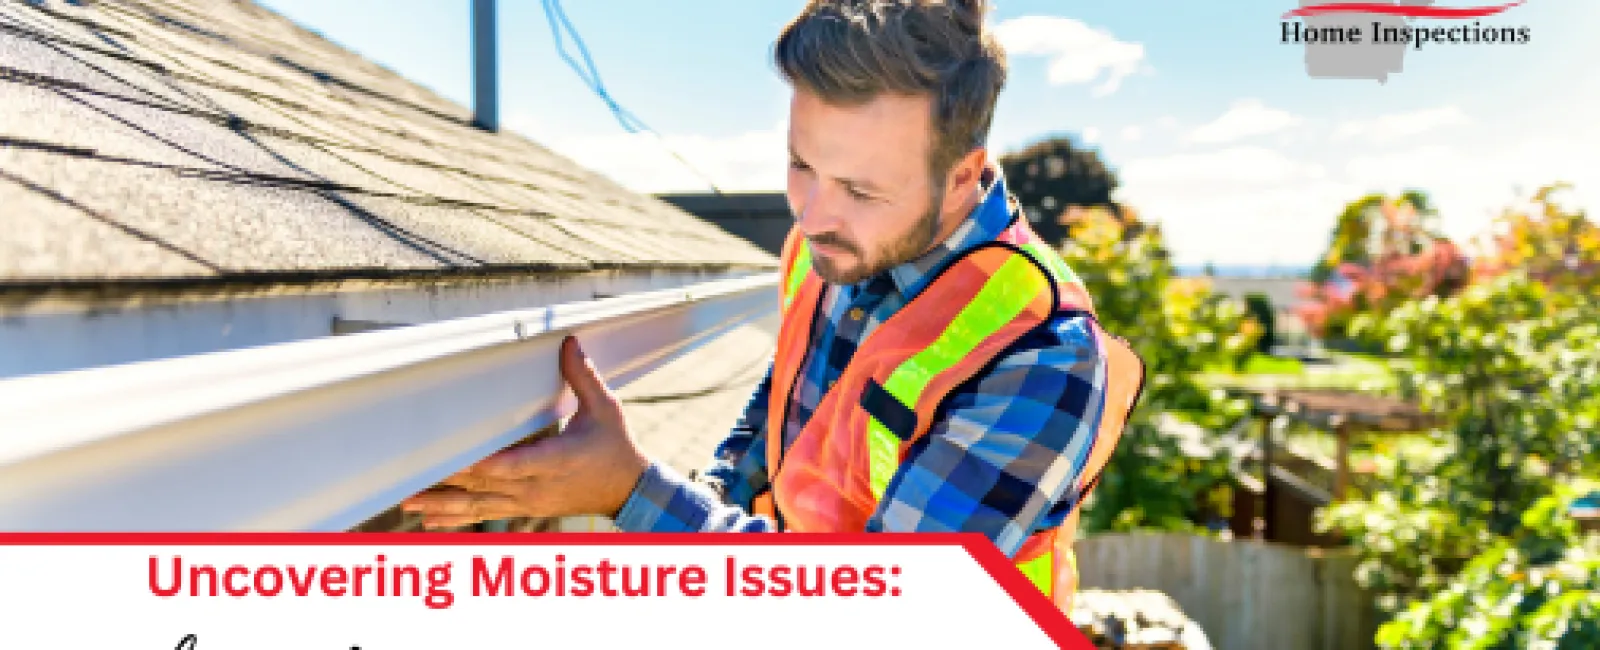 Uncovering Moisture Issues: The Role of Home Inspections